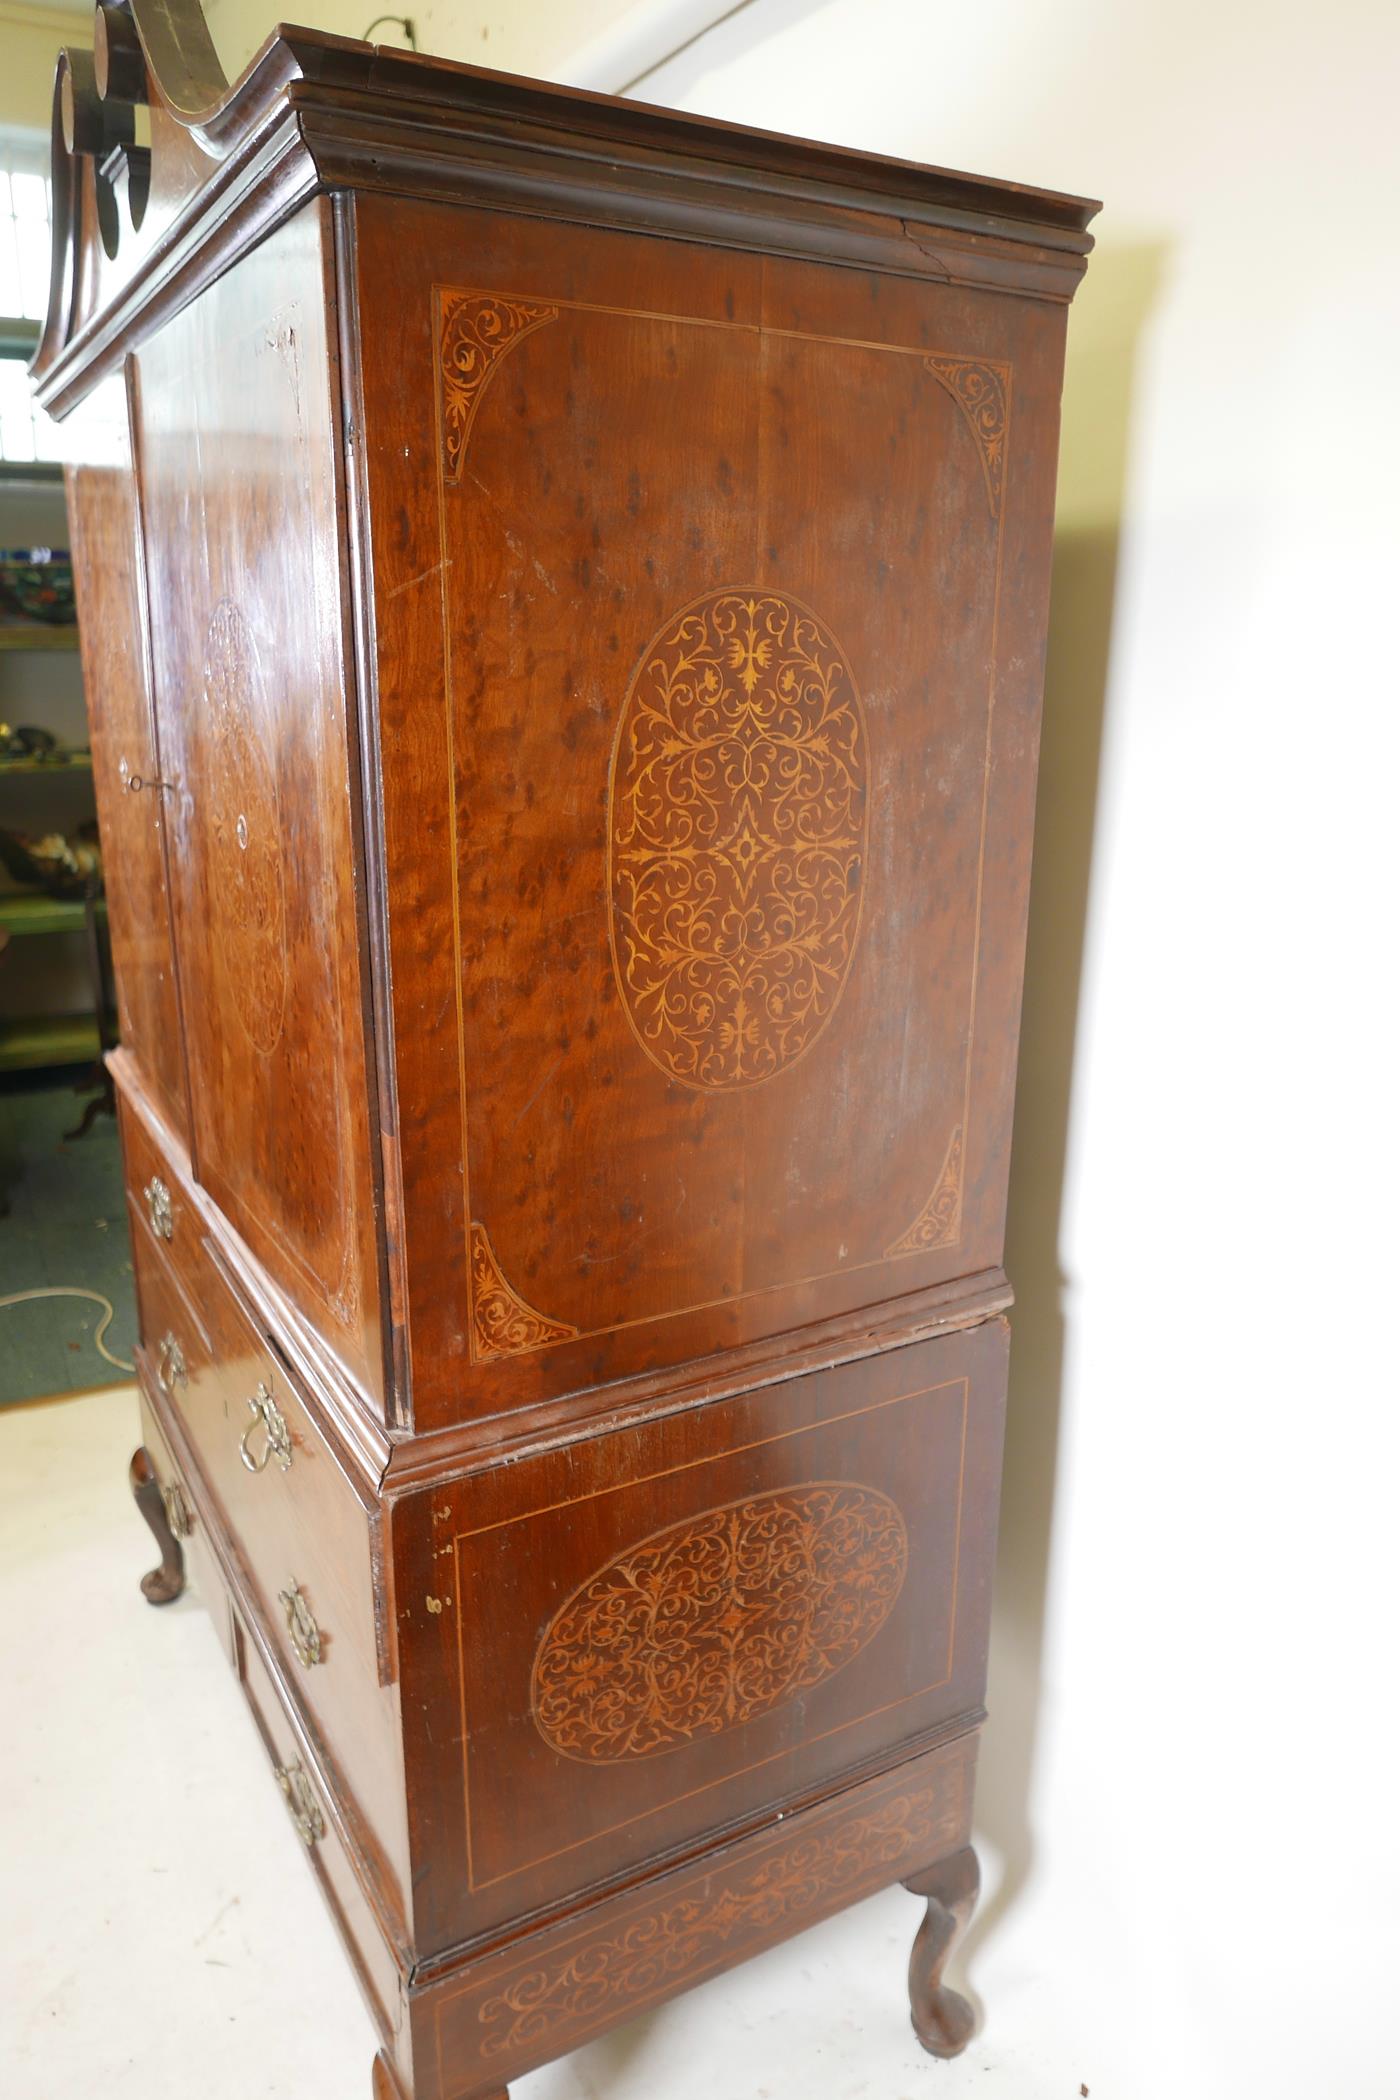 A C19th plum pudding mahogany press cupboard, with inlaid seaweed panel panels, the upper section - Image 3 of 5